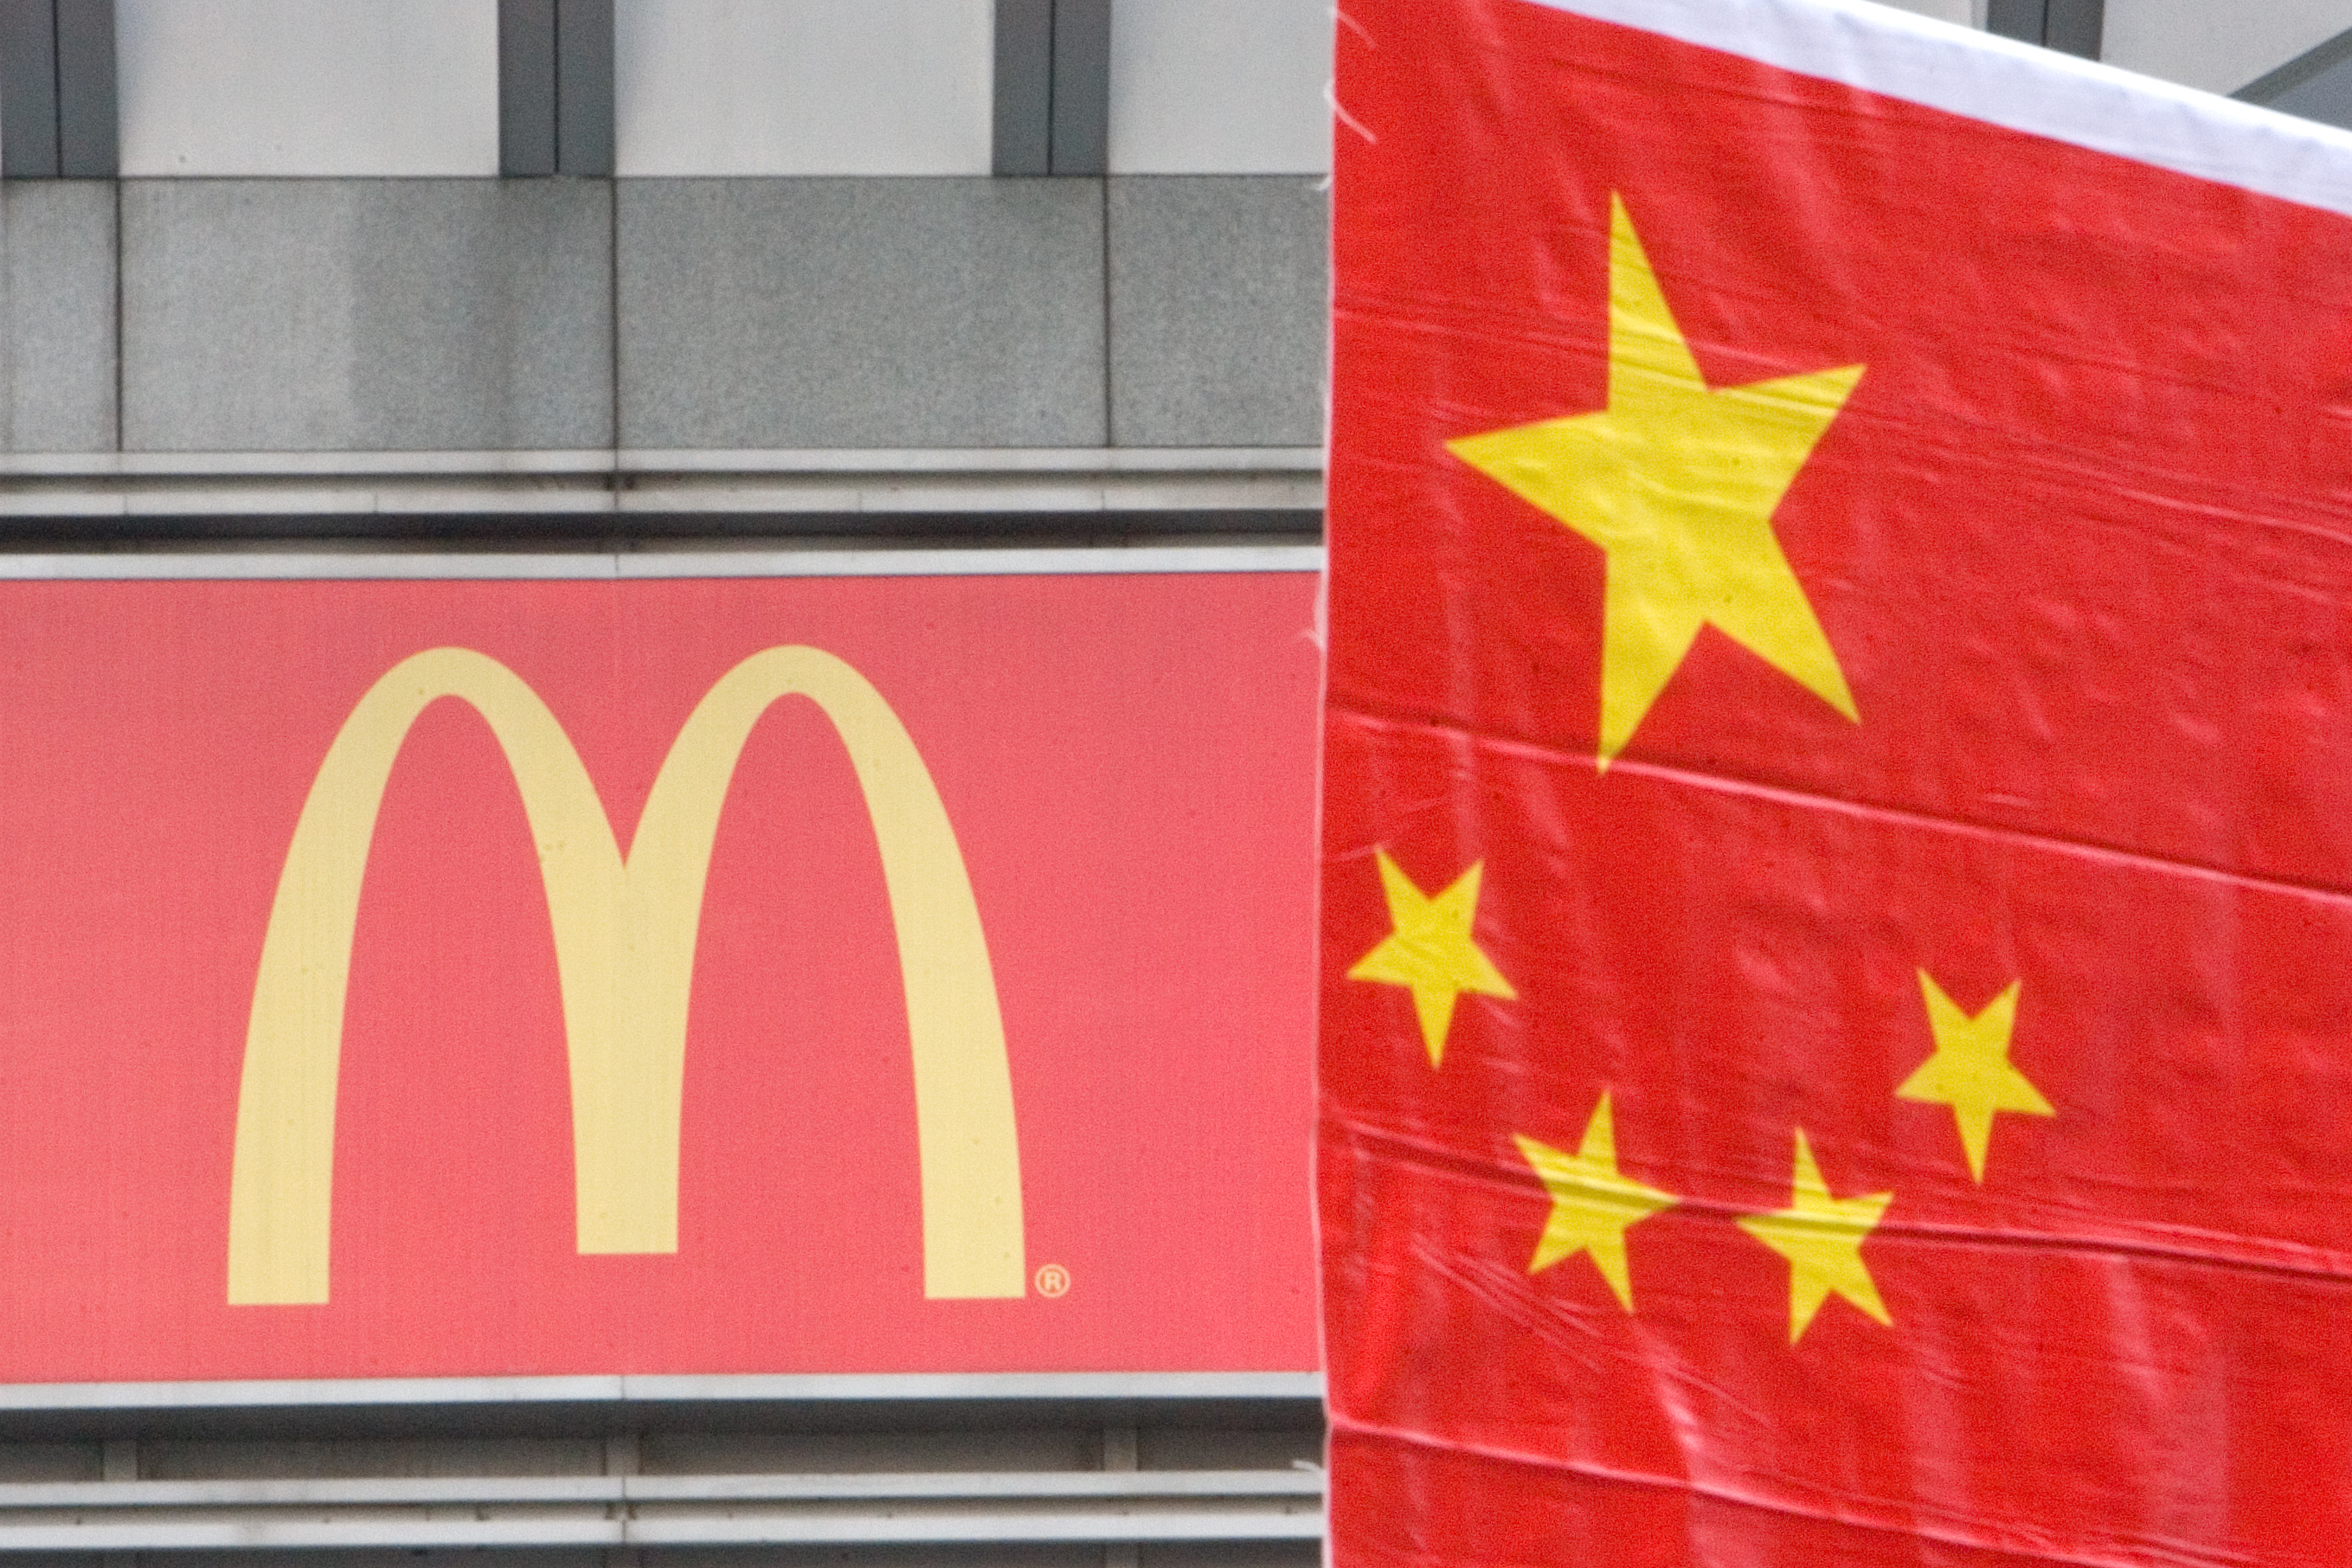 A Chinese flag is put up on Sept. 30, 2007, in Shanghai by a McDonald's sign for a celebration of China's National Day on Oct. 1 (Lucas Schifres—Getty Images)